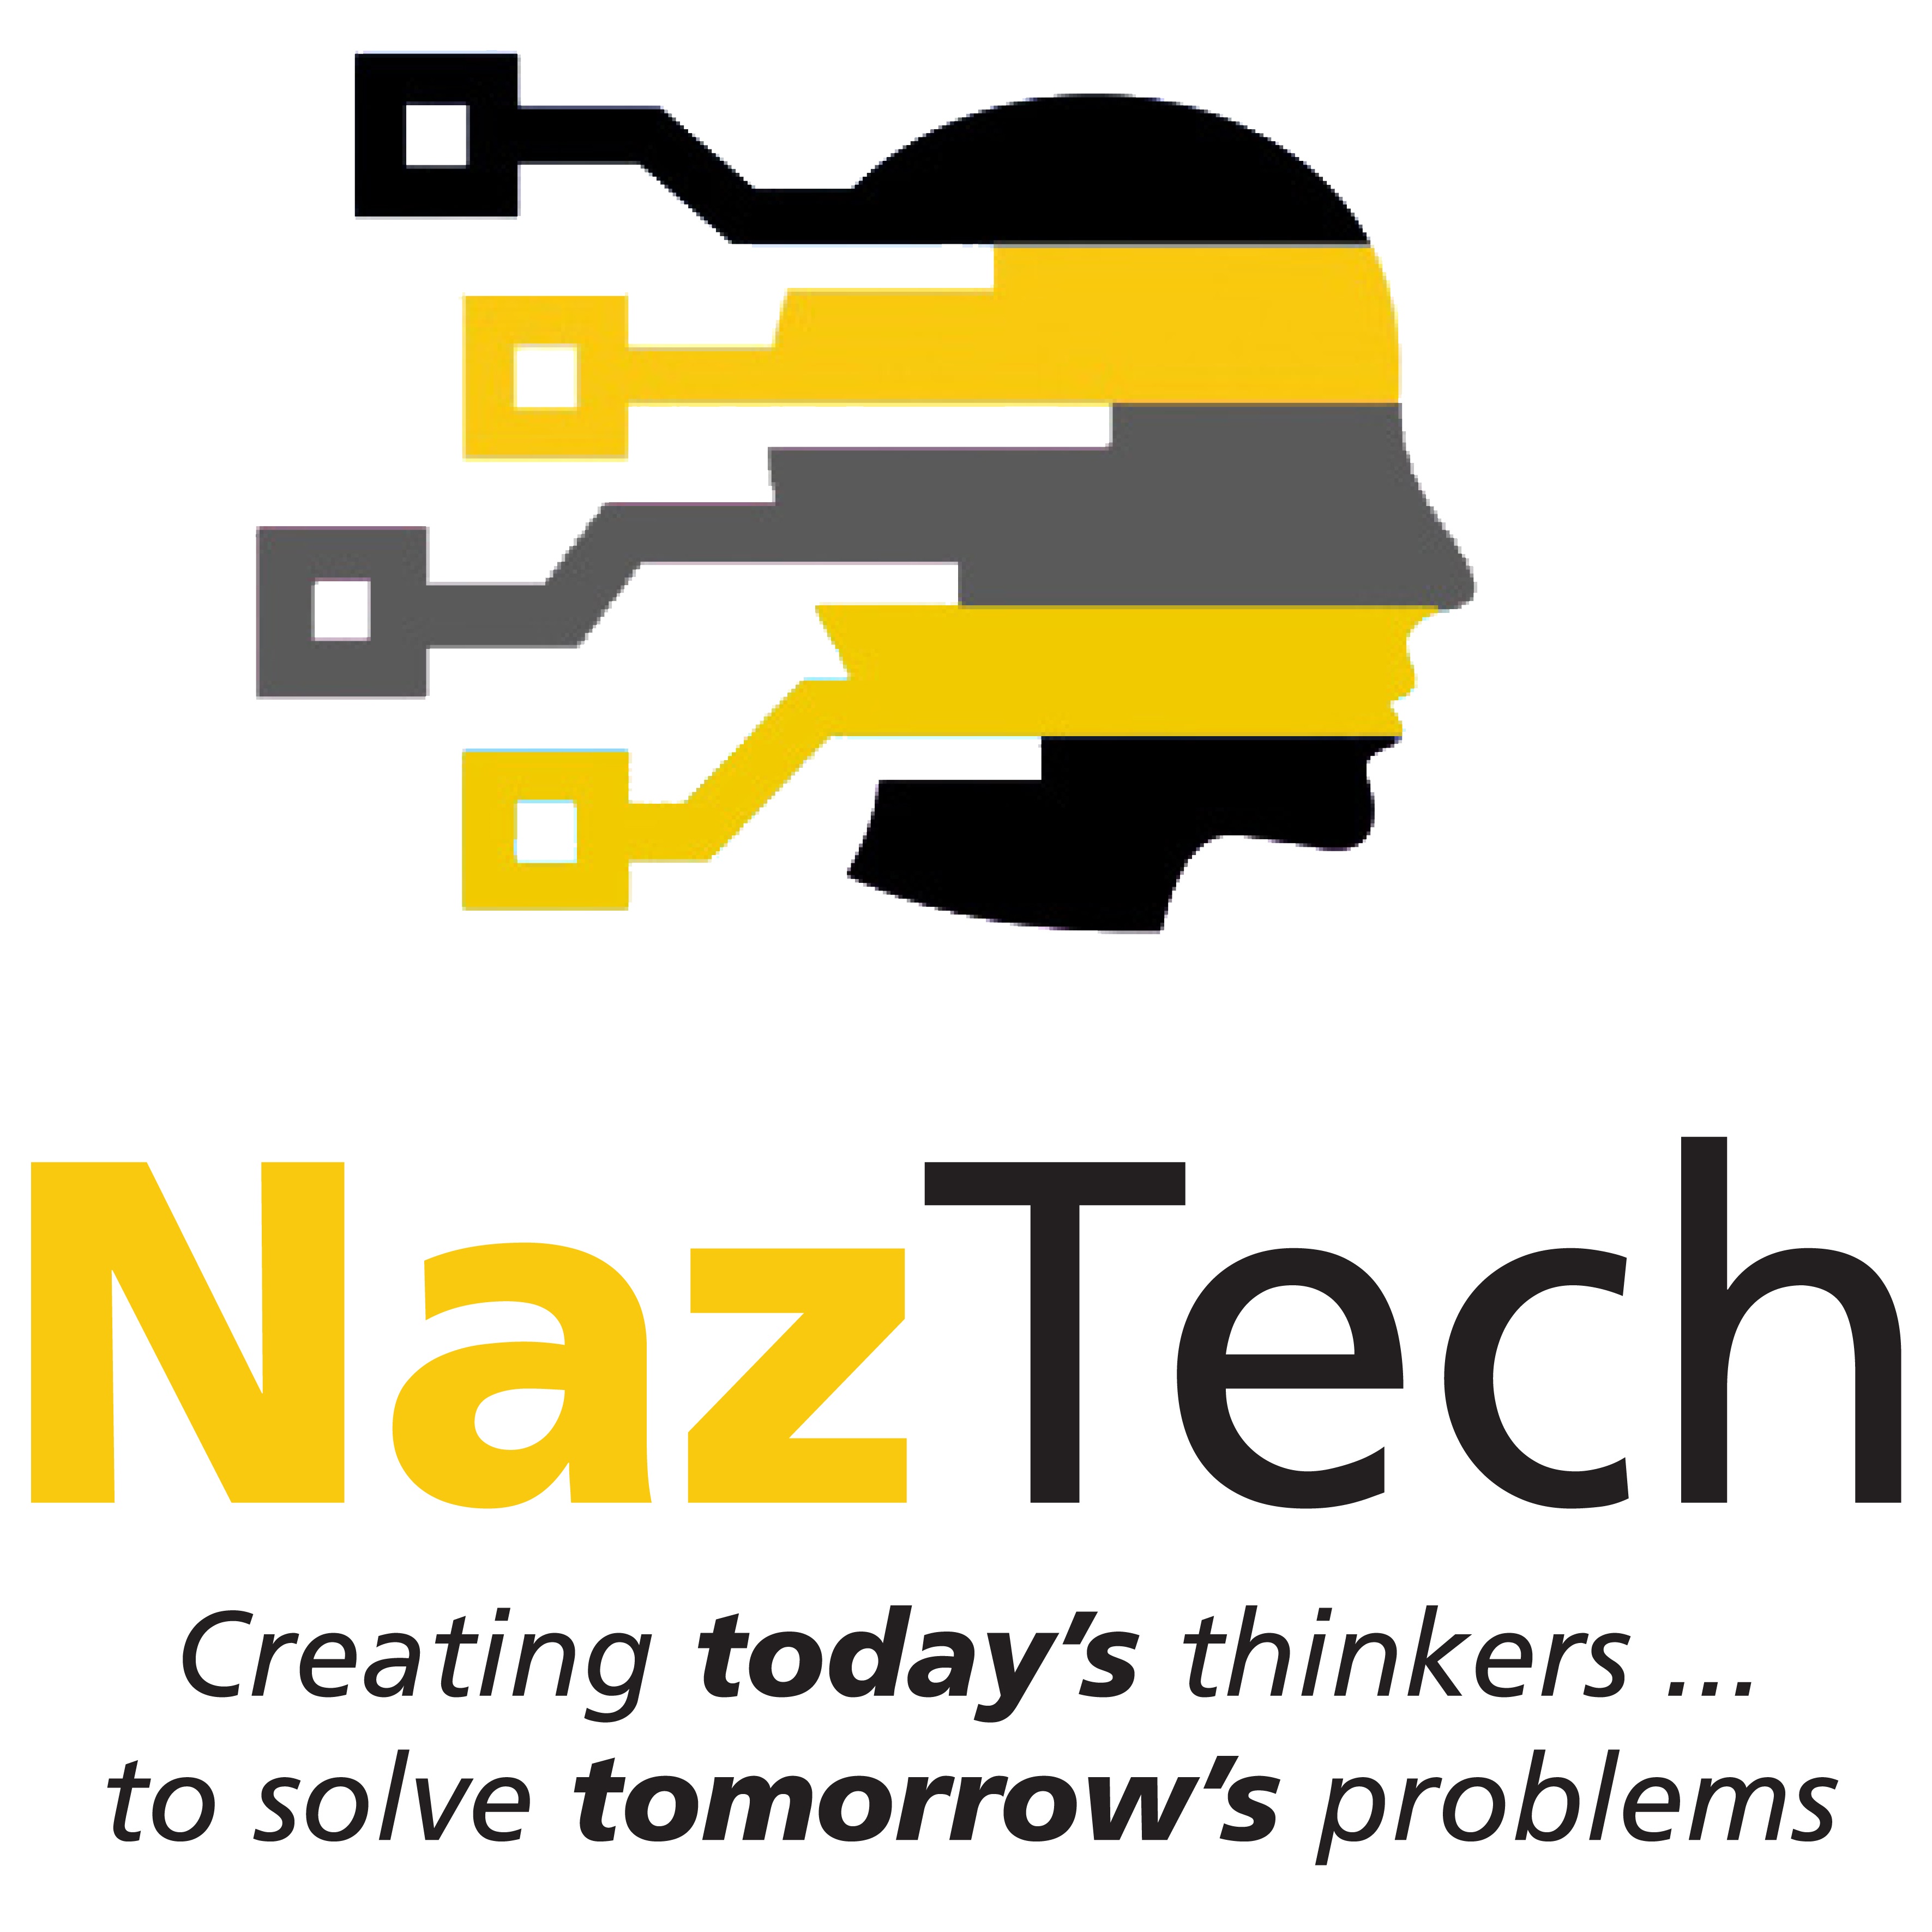 Image of NazTech logo: Creating today's thinkers to solve tomorrow's problems